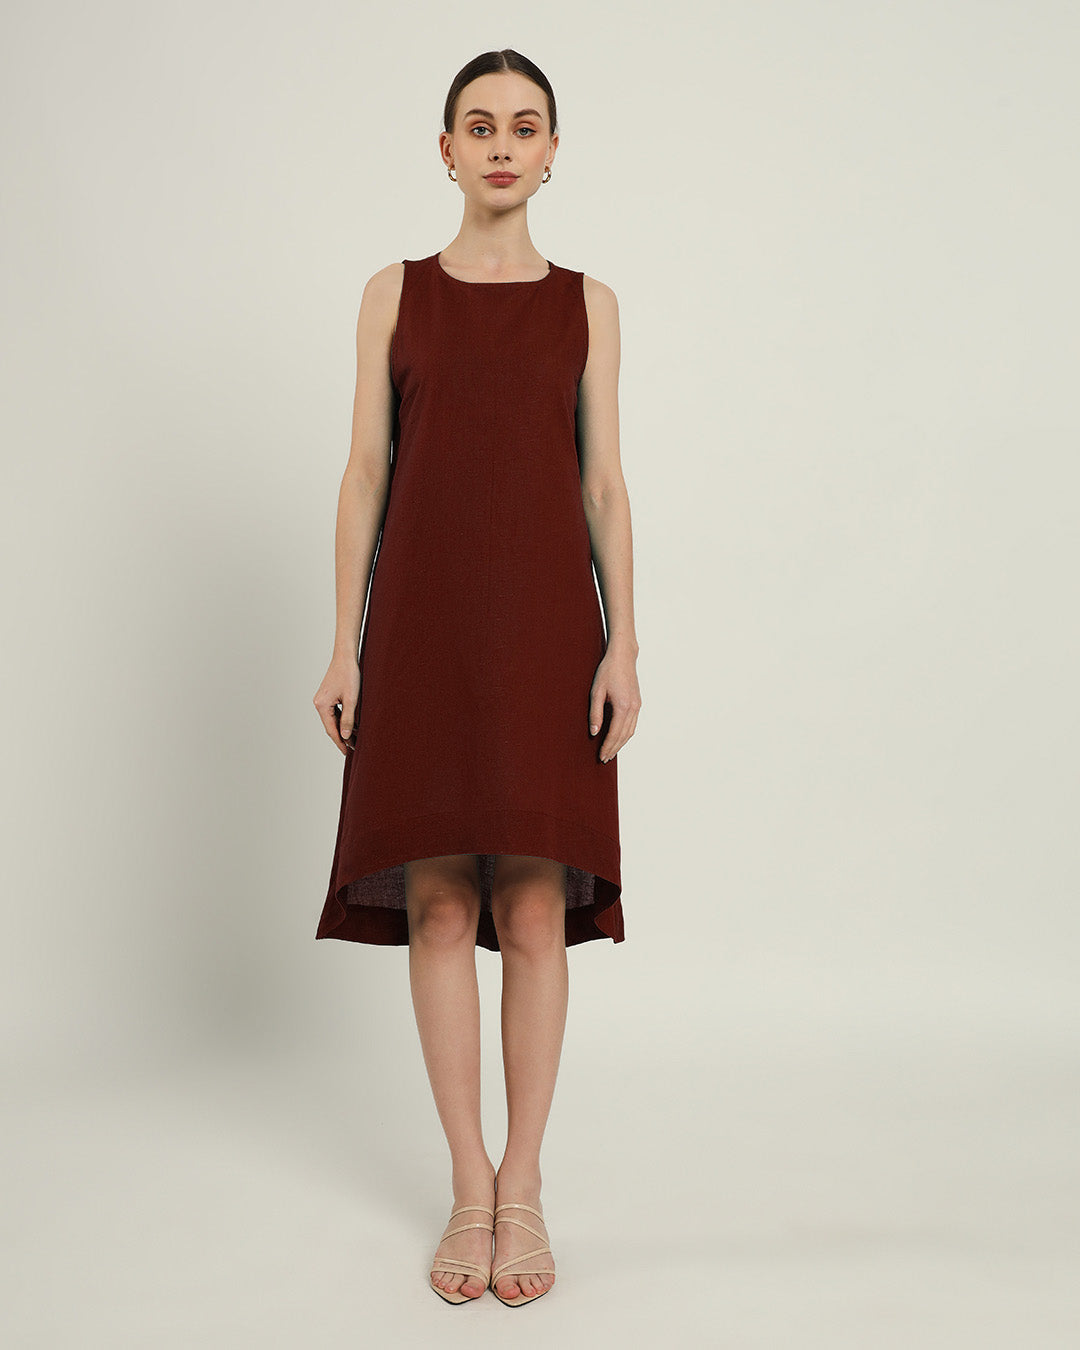 The Odesa Rouge Dress